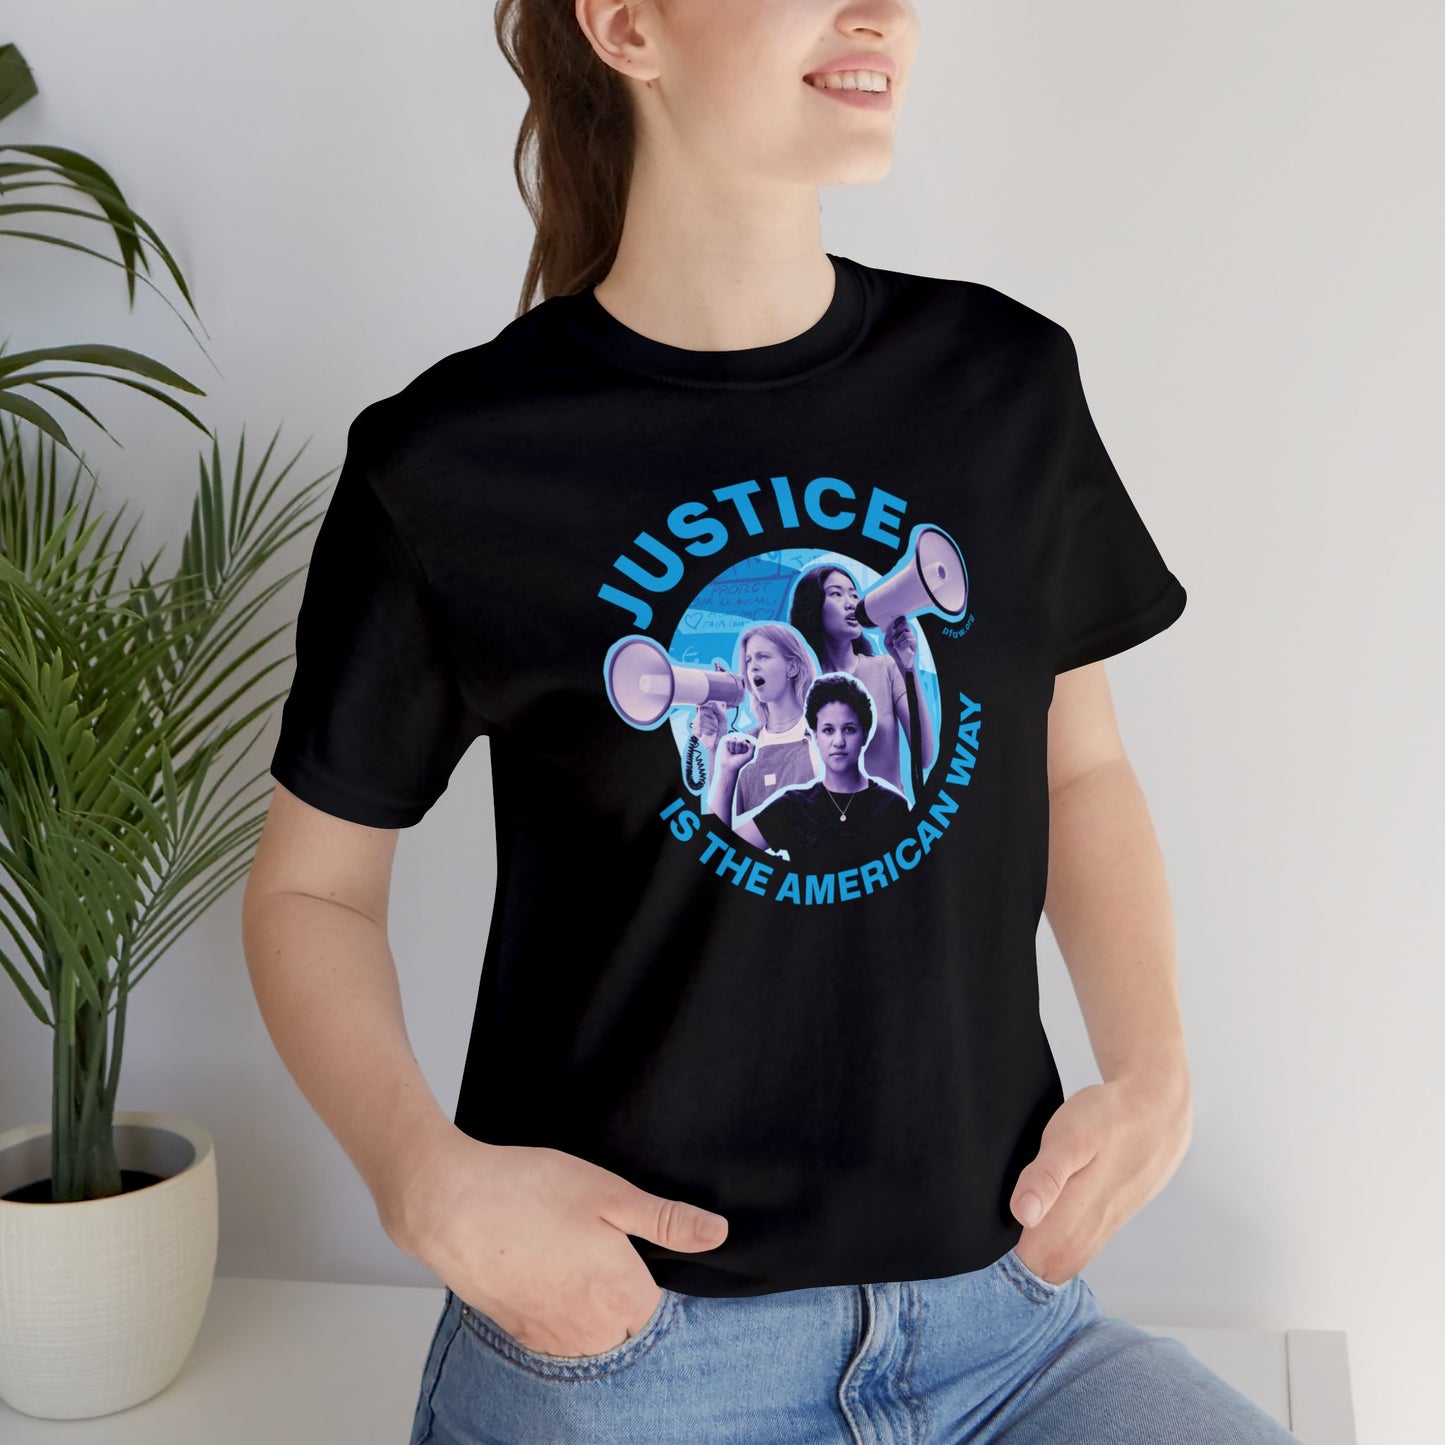 Justice is the American Way Shirt